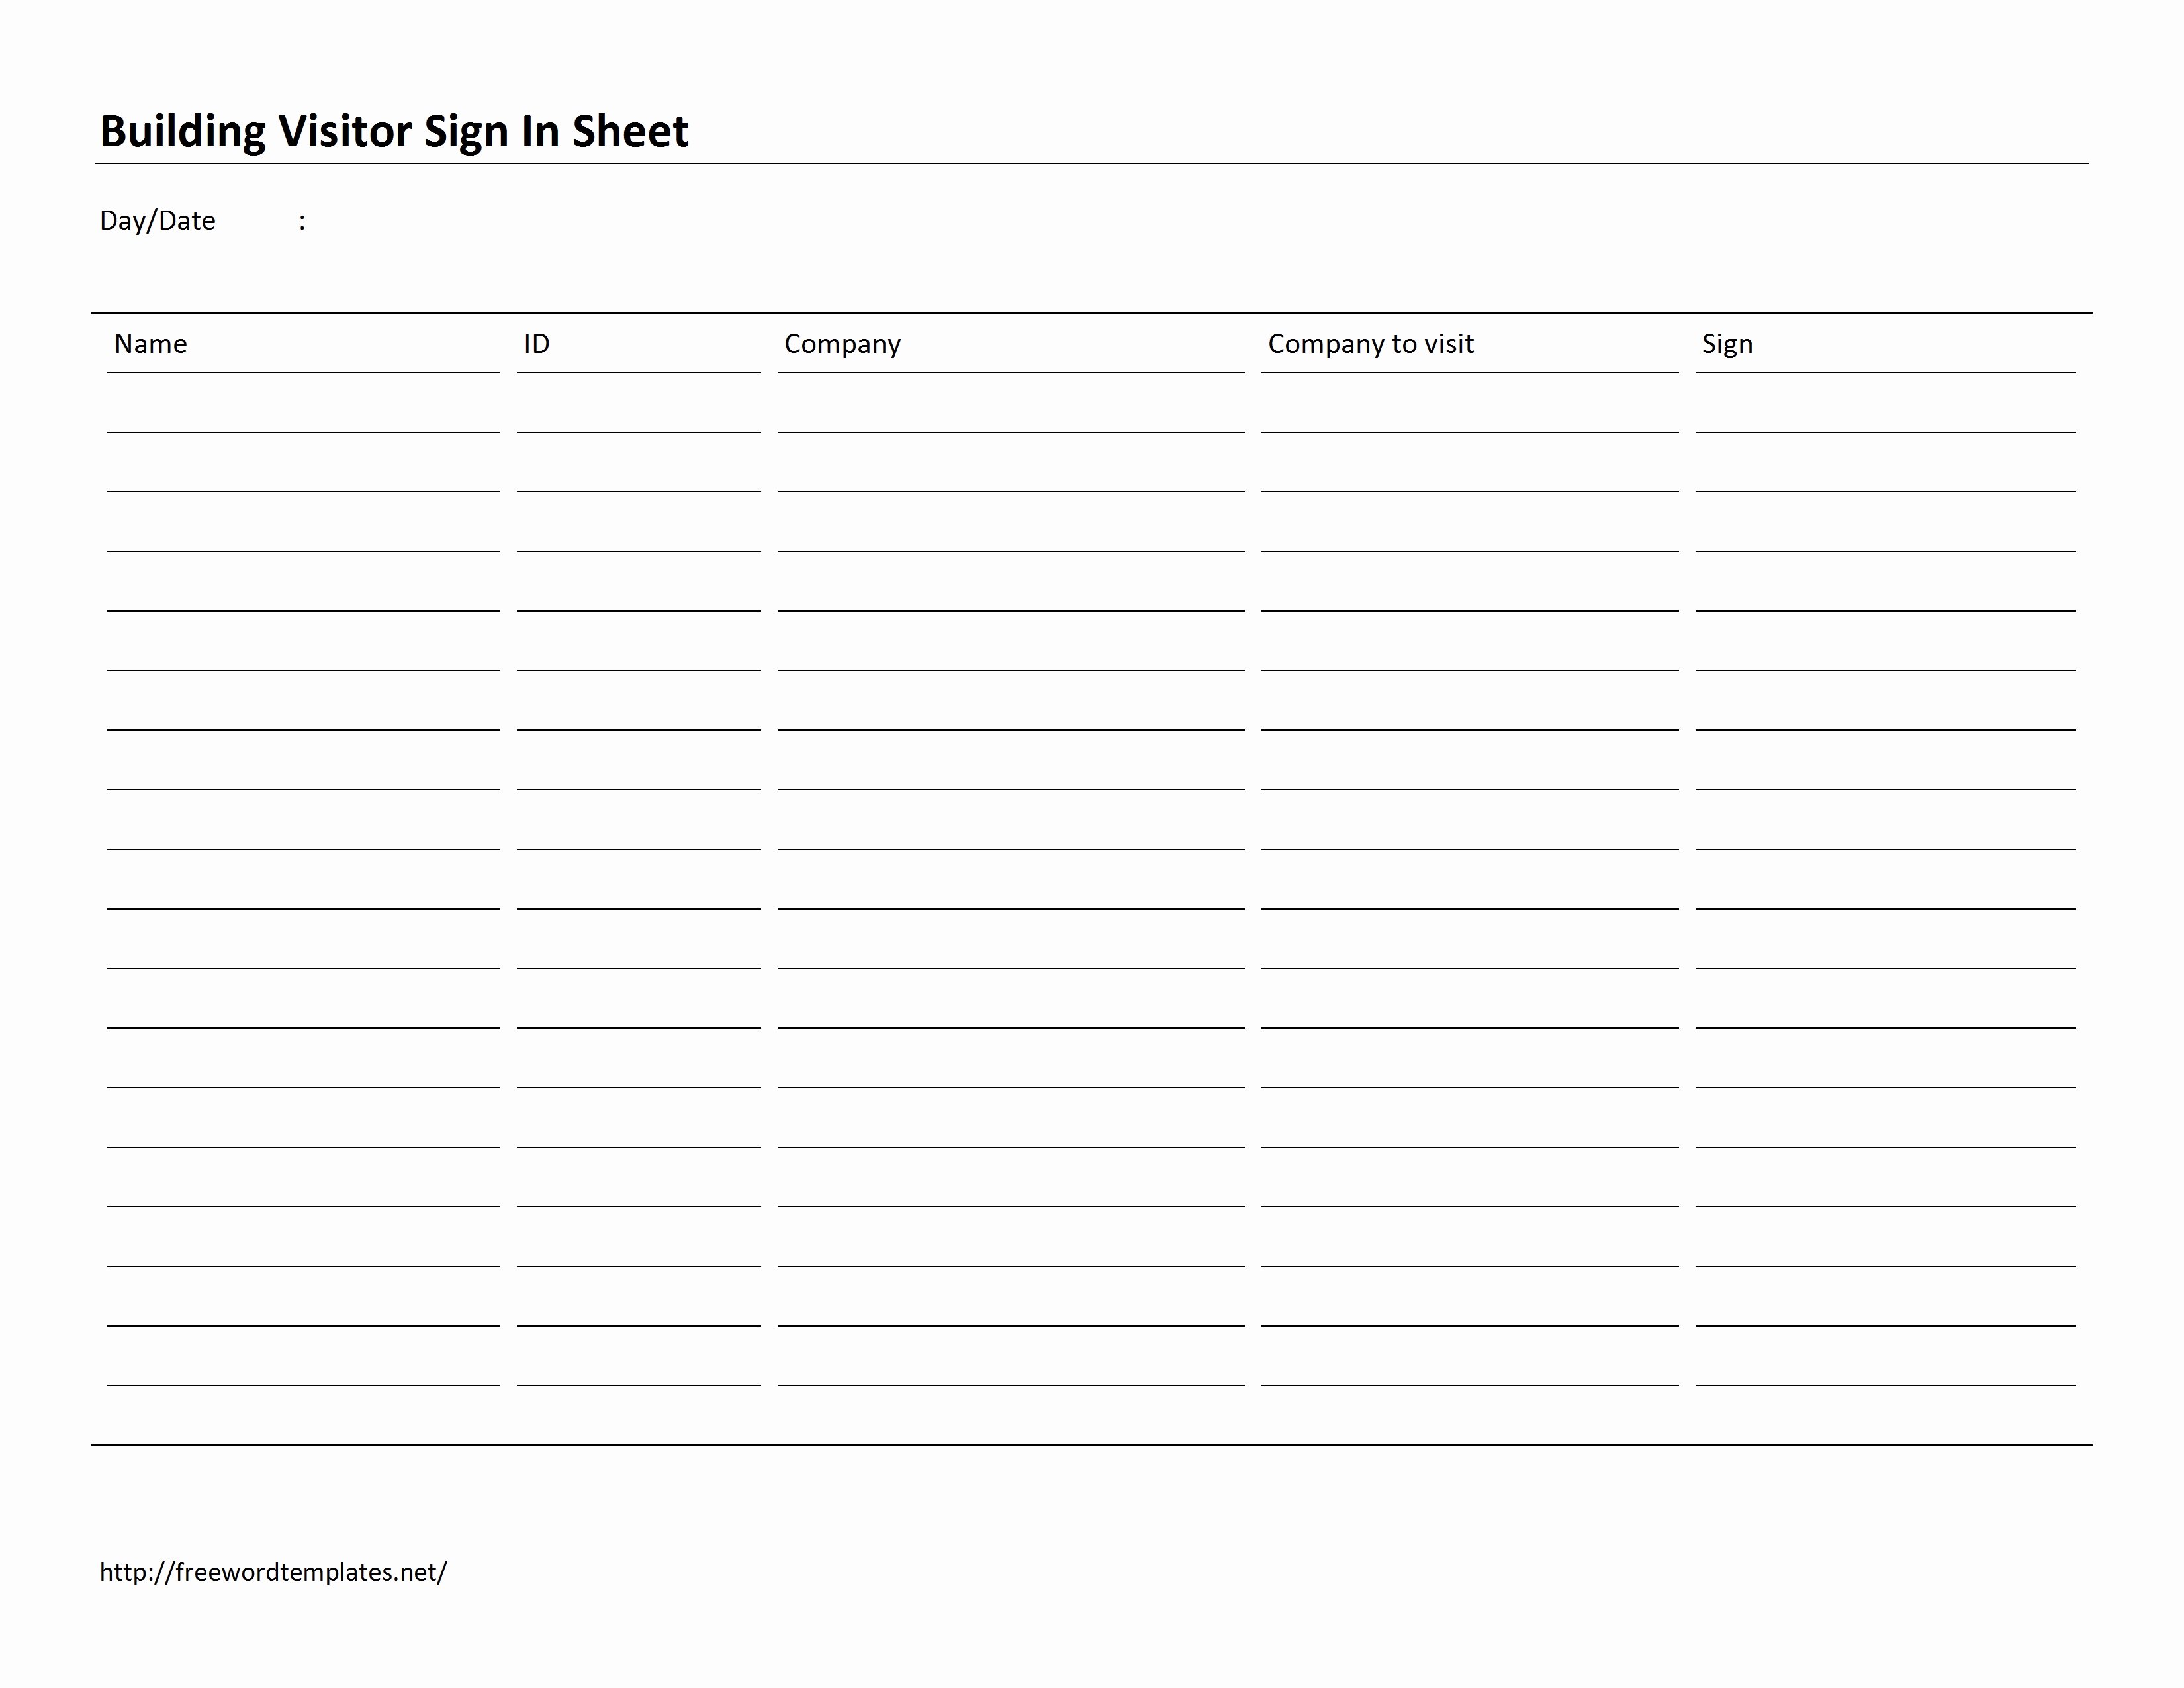 Building Visitor Sign In Sheet Template